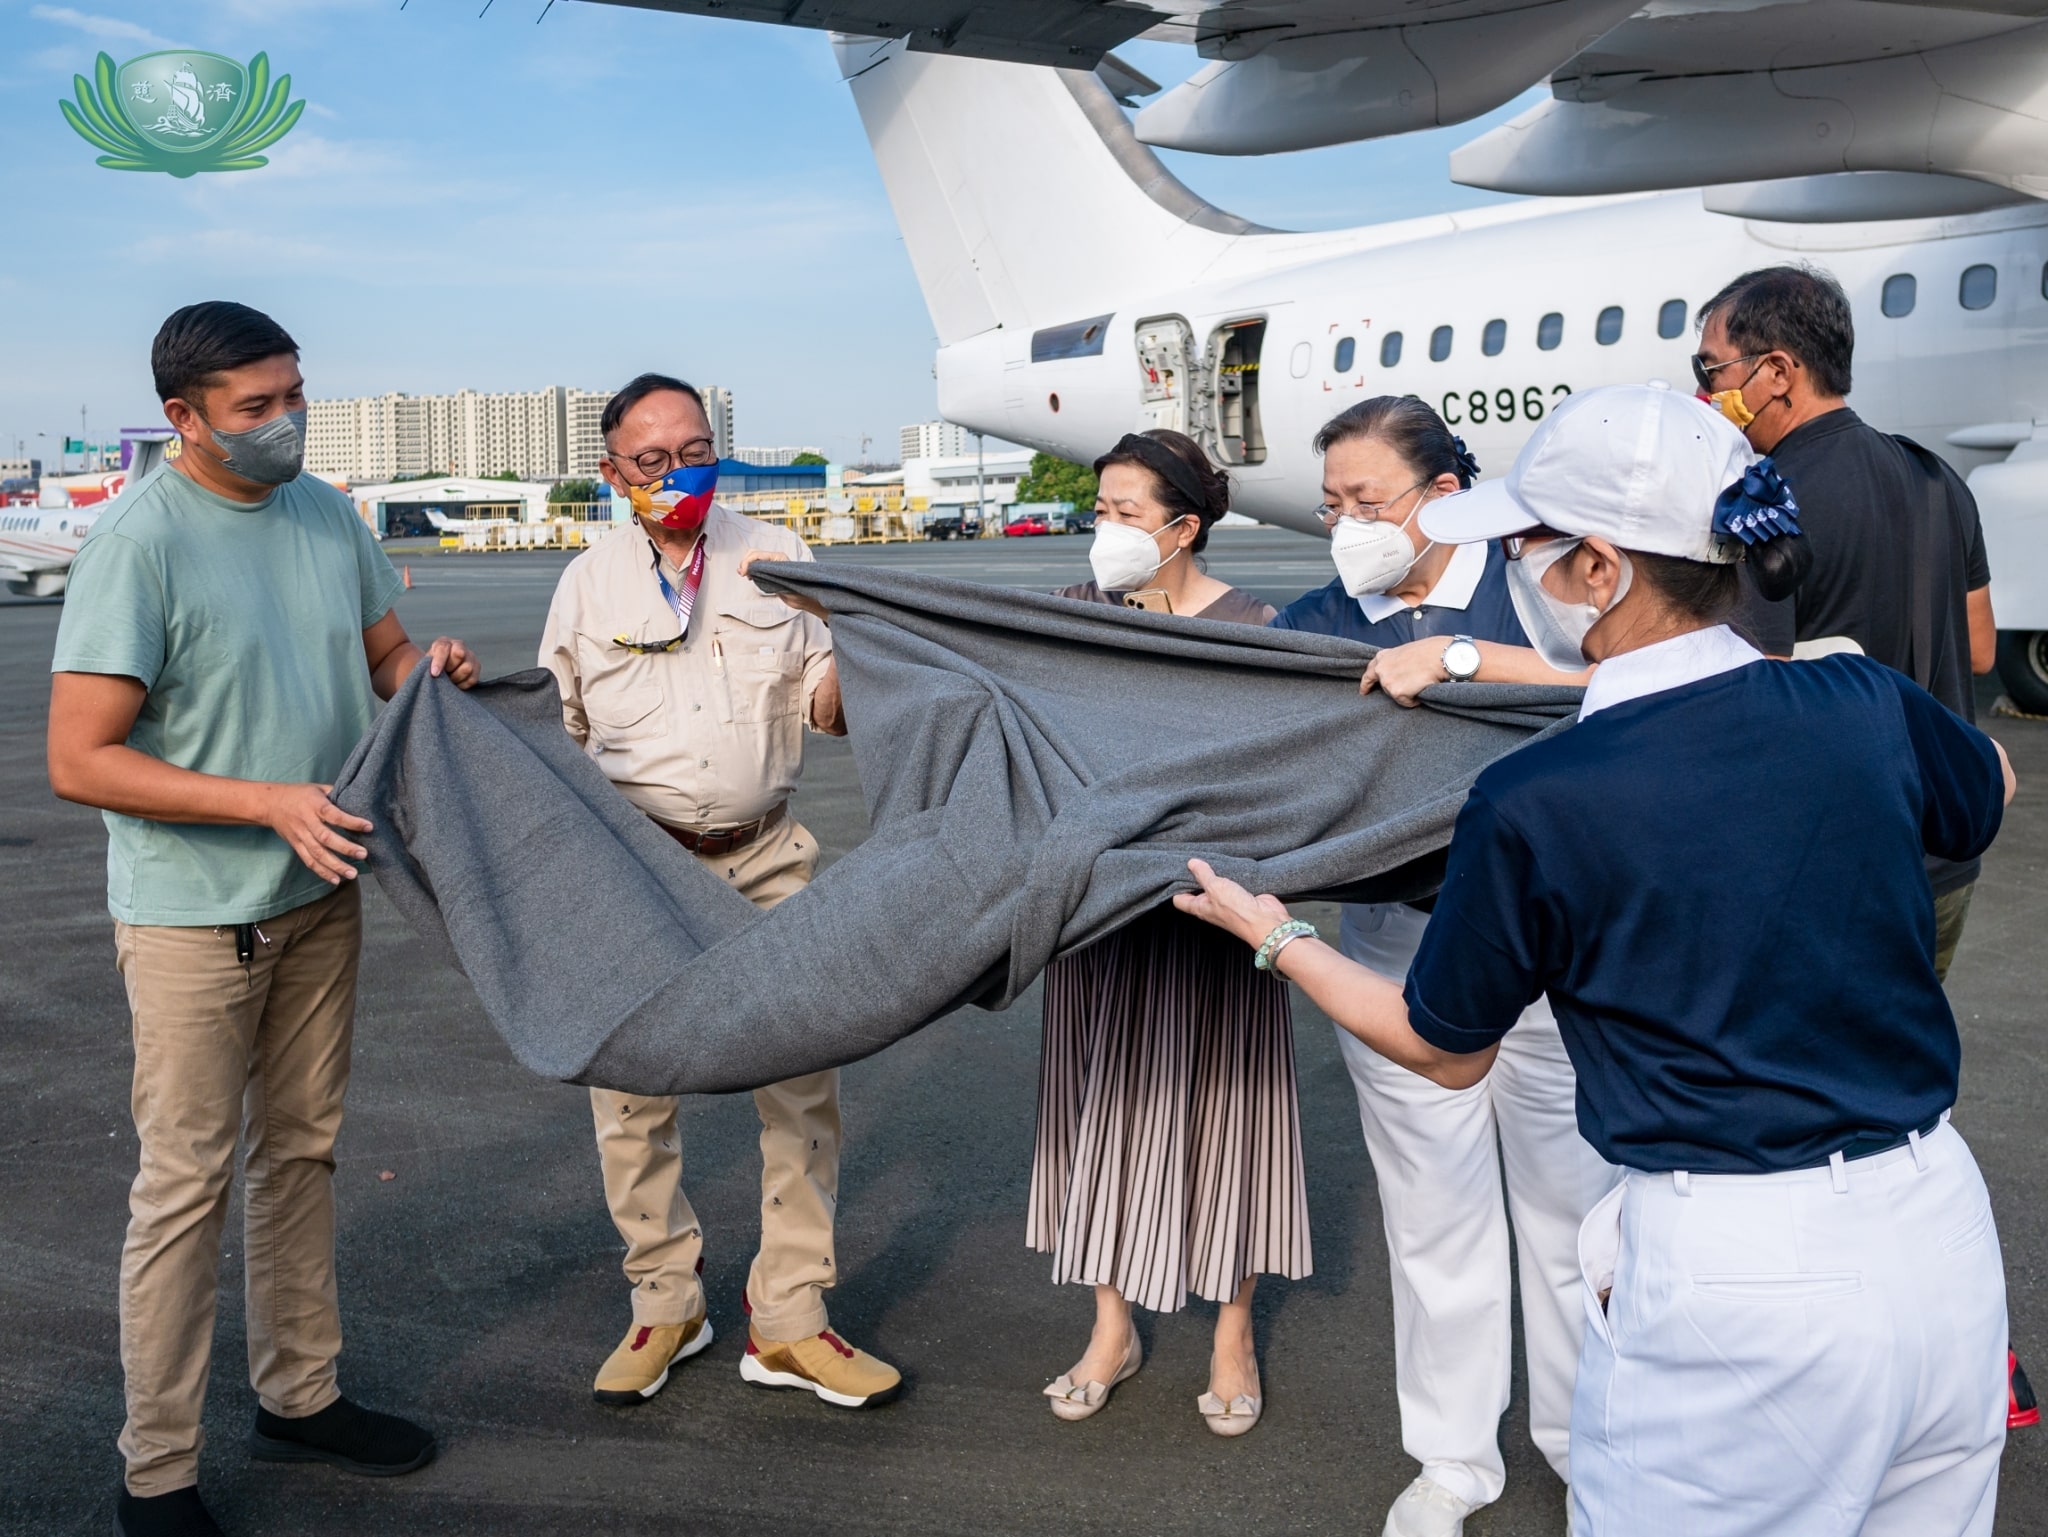 Made of fleece and upcycled PET bottles, the blankets from Taiwan are durable and last for years. Buddy Zamora (second from left) and Elsie Chua (third from left) helped facilitate the flight for the transport and distribution of the blankets. 【Photo by Daniel Lazar】 